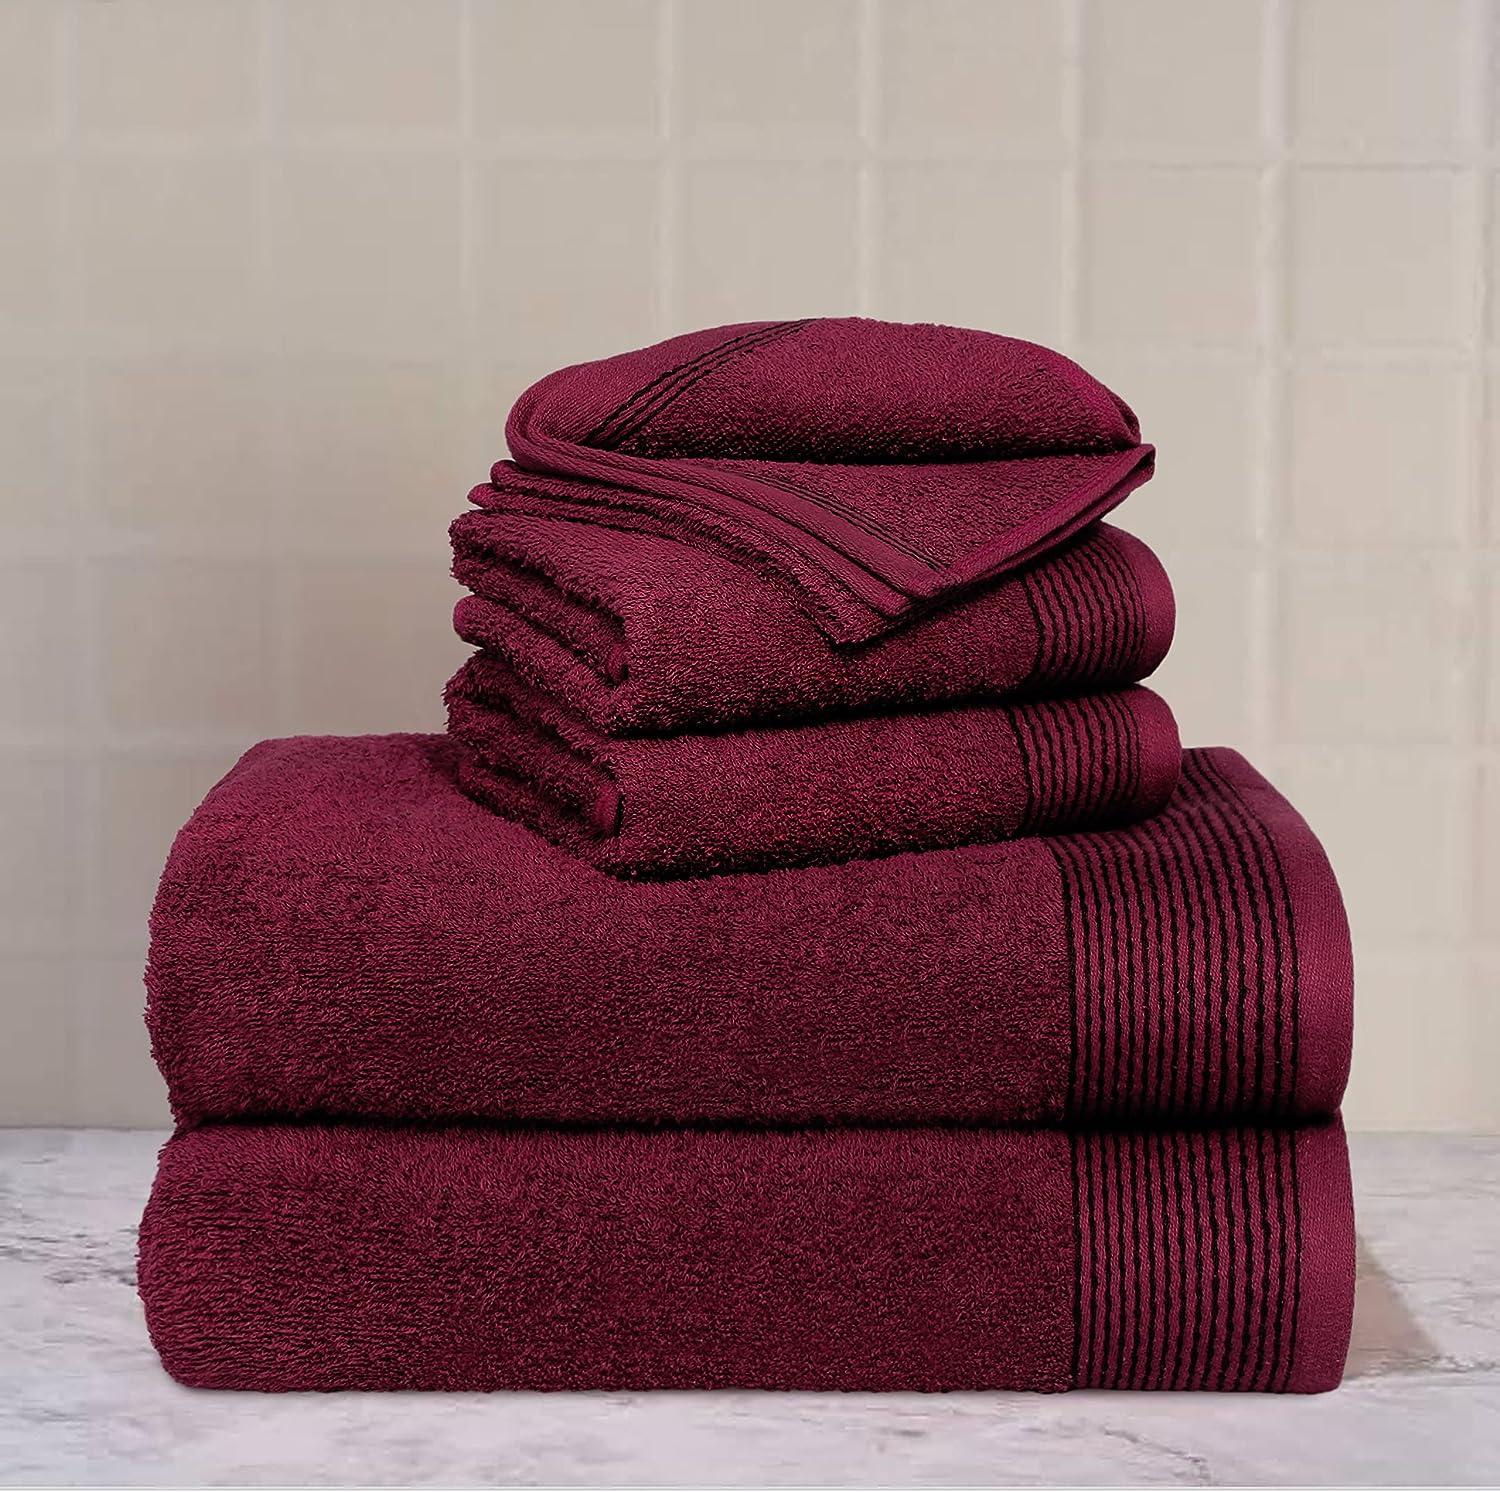 Belizzi Home Cotton 2 Pack Oversized Bath Towel Set 28x55 inches, Large  Bath Towels, Ultra Absorbant Compact Quickdry & Lightweight Towel, Ideal  for